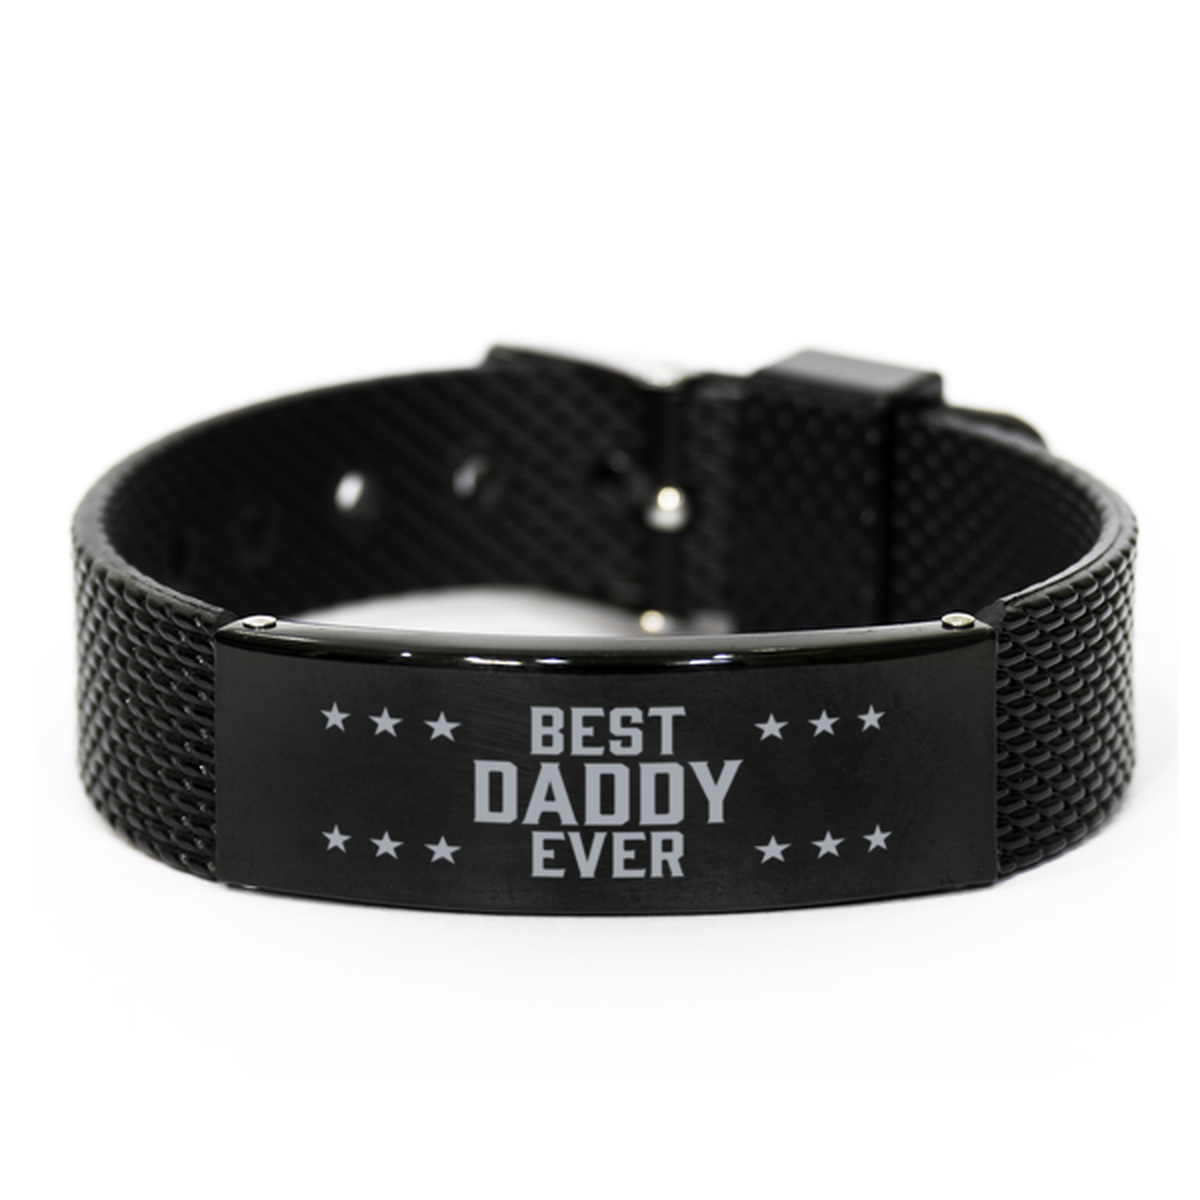 Best Daddy Ever Daddy Gifts, Gag Engraved Bracelet For Daddy, Best Family Gifts For Men